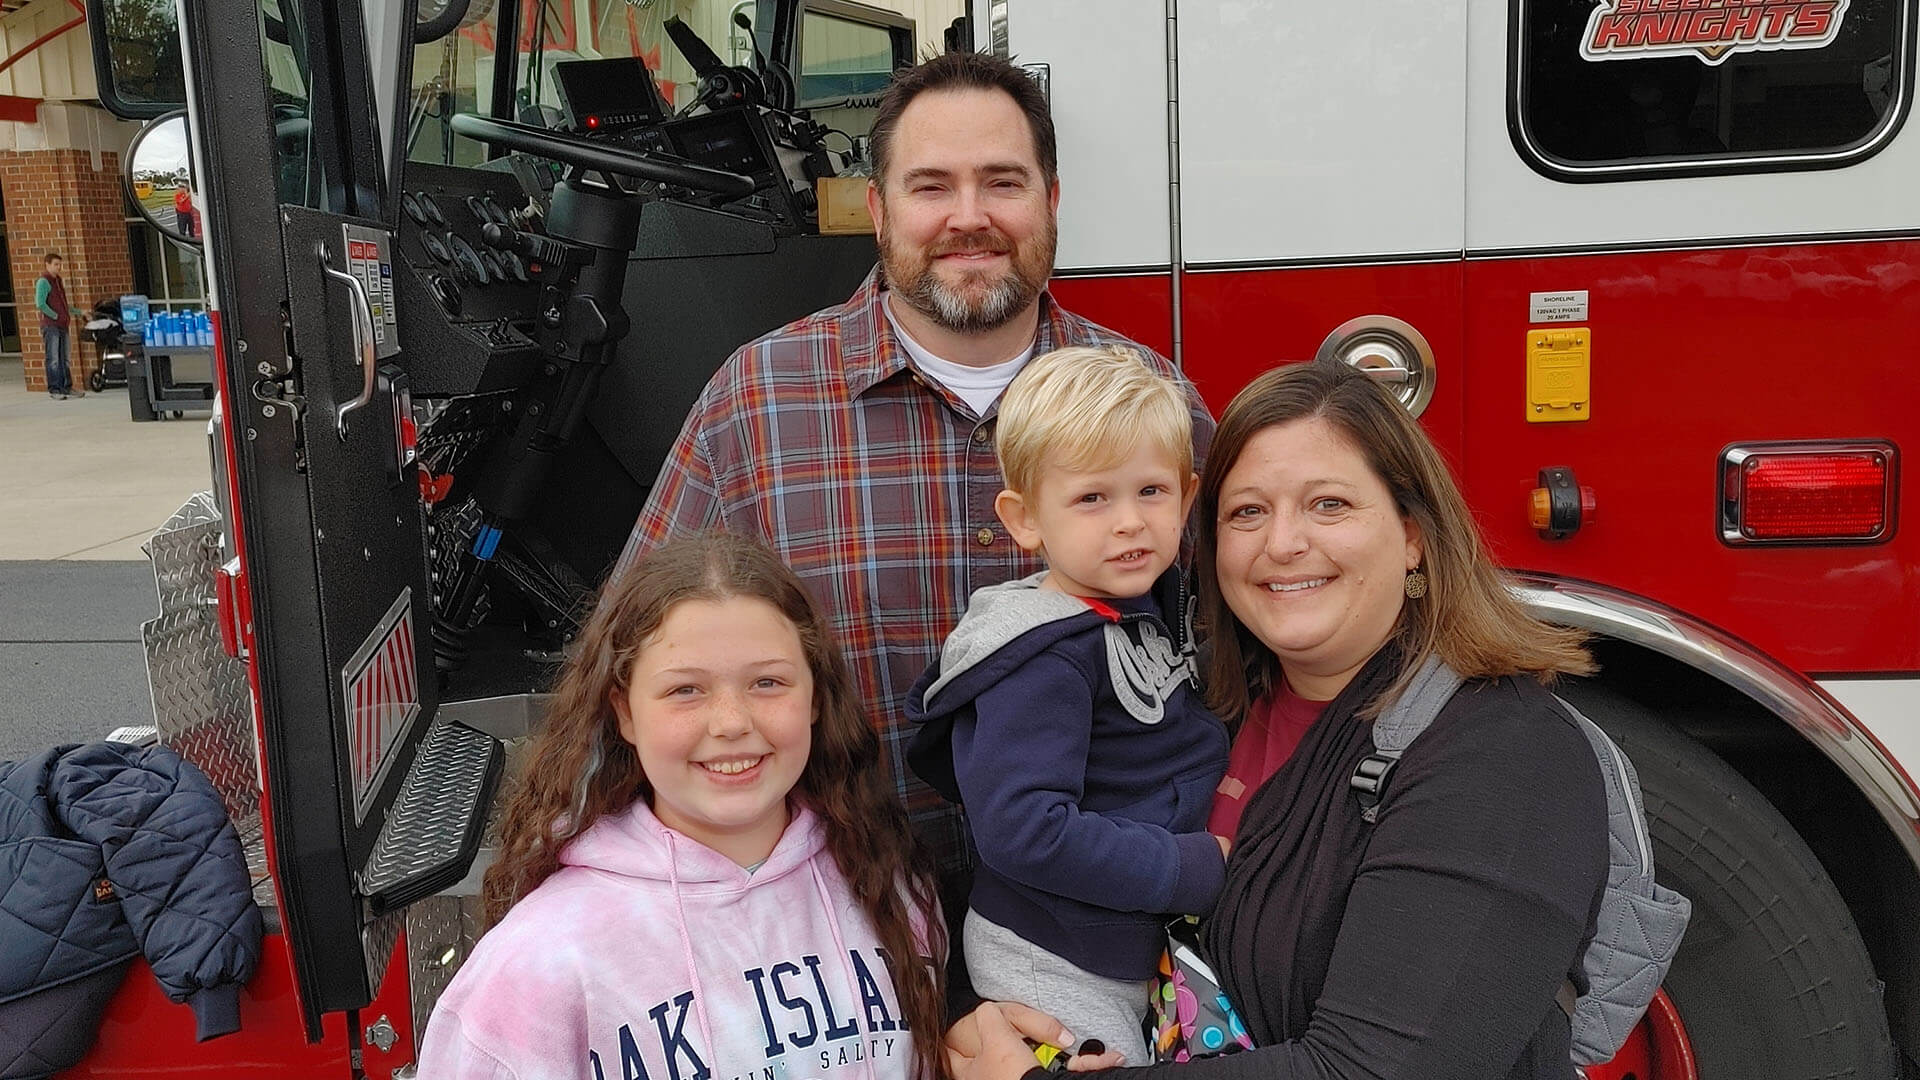 A family of four smiling at the camera, standing in front of a fire truck.